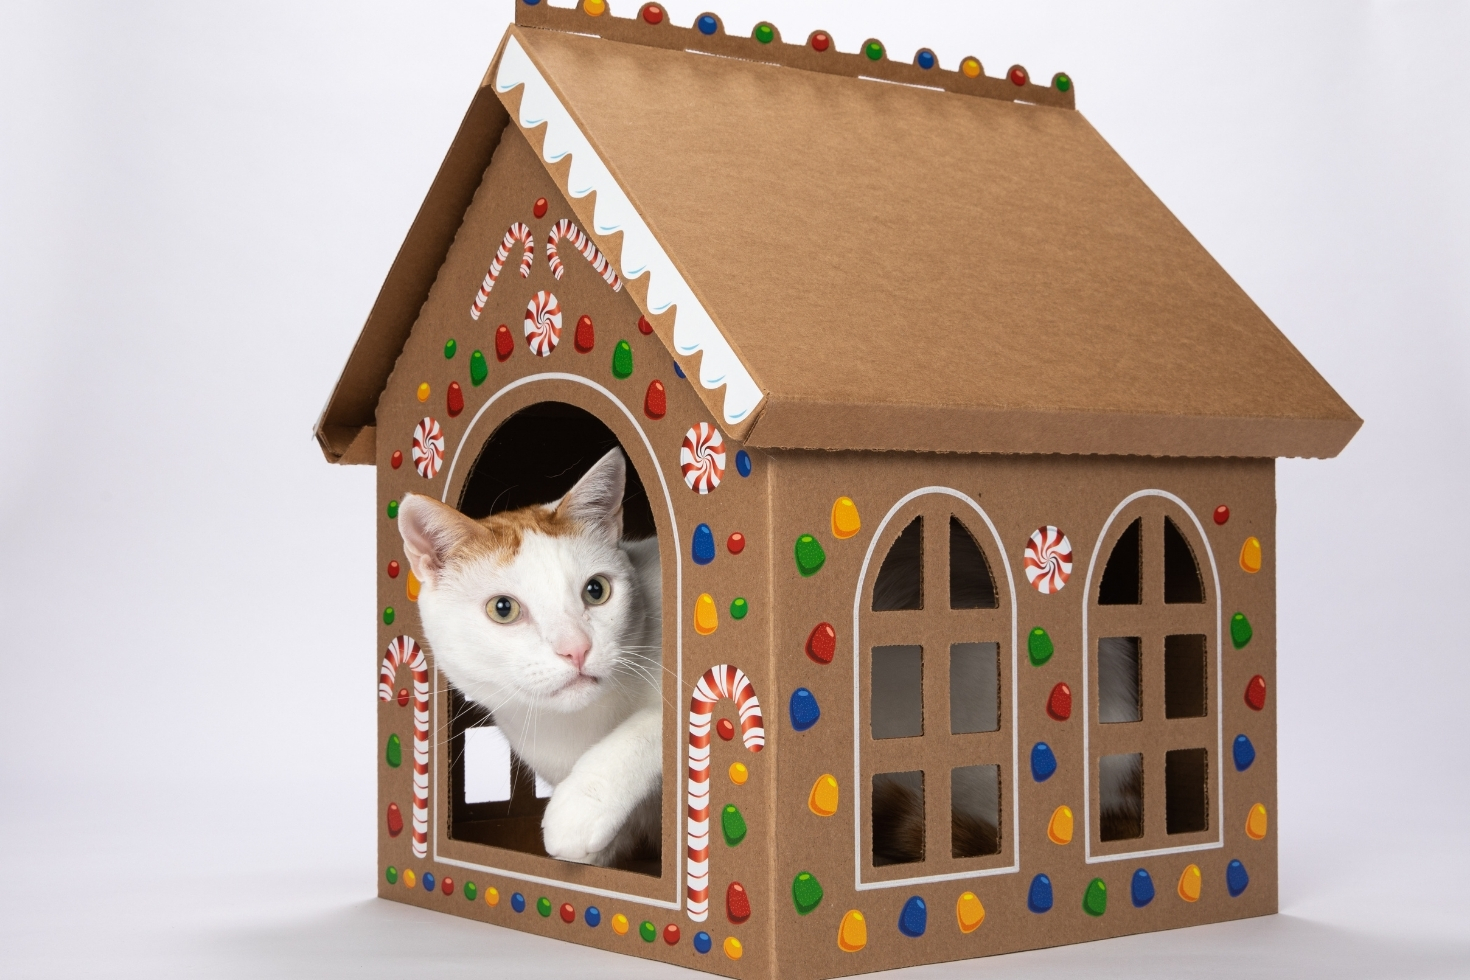 White cat inside of a cardboard box shaped as a house